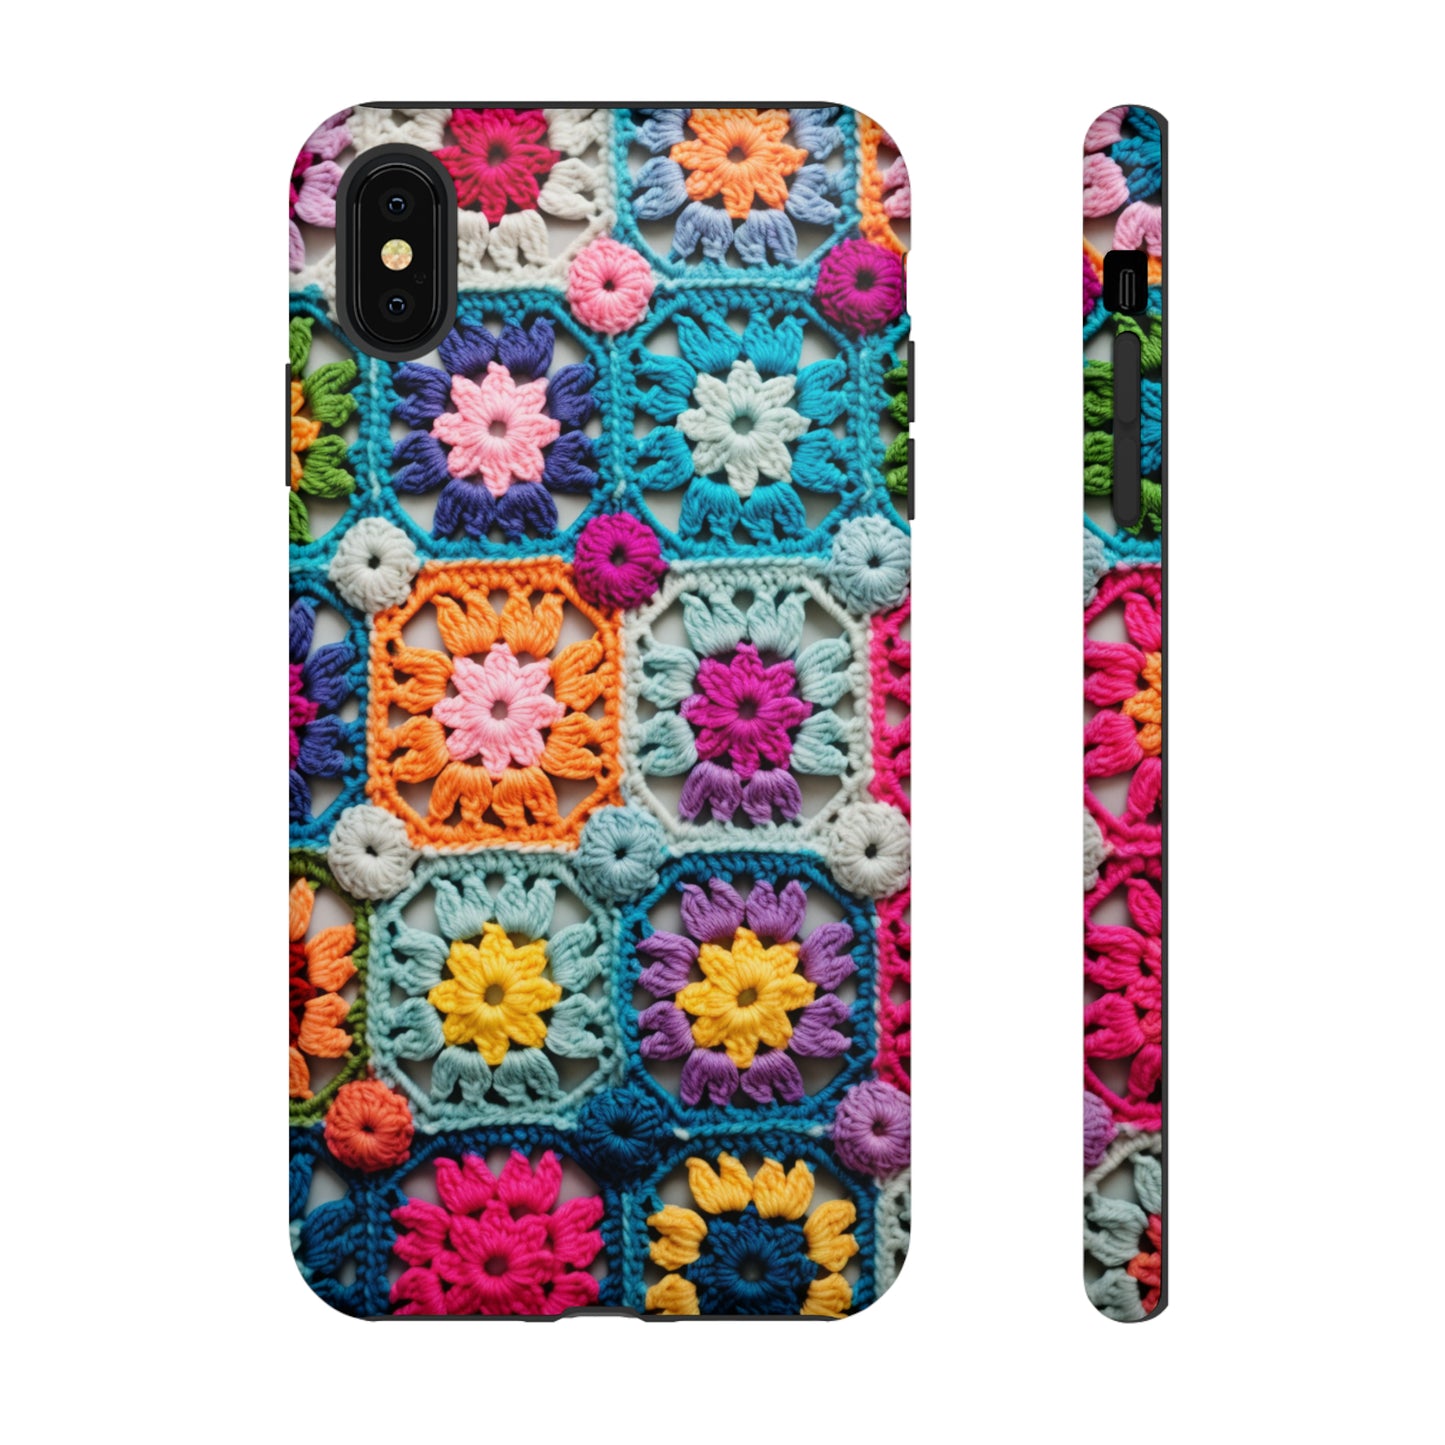 Cottagecore-inspired crochet pattern case for iPhone